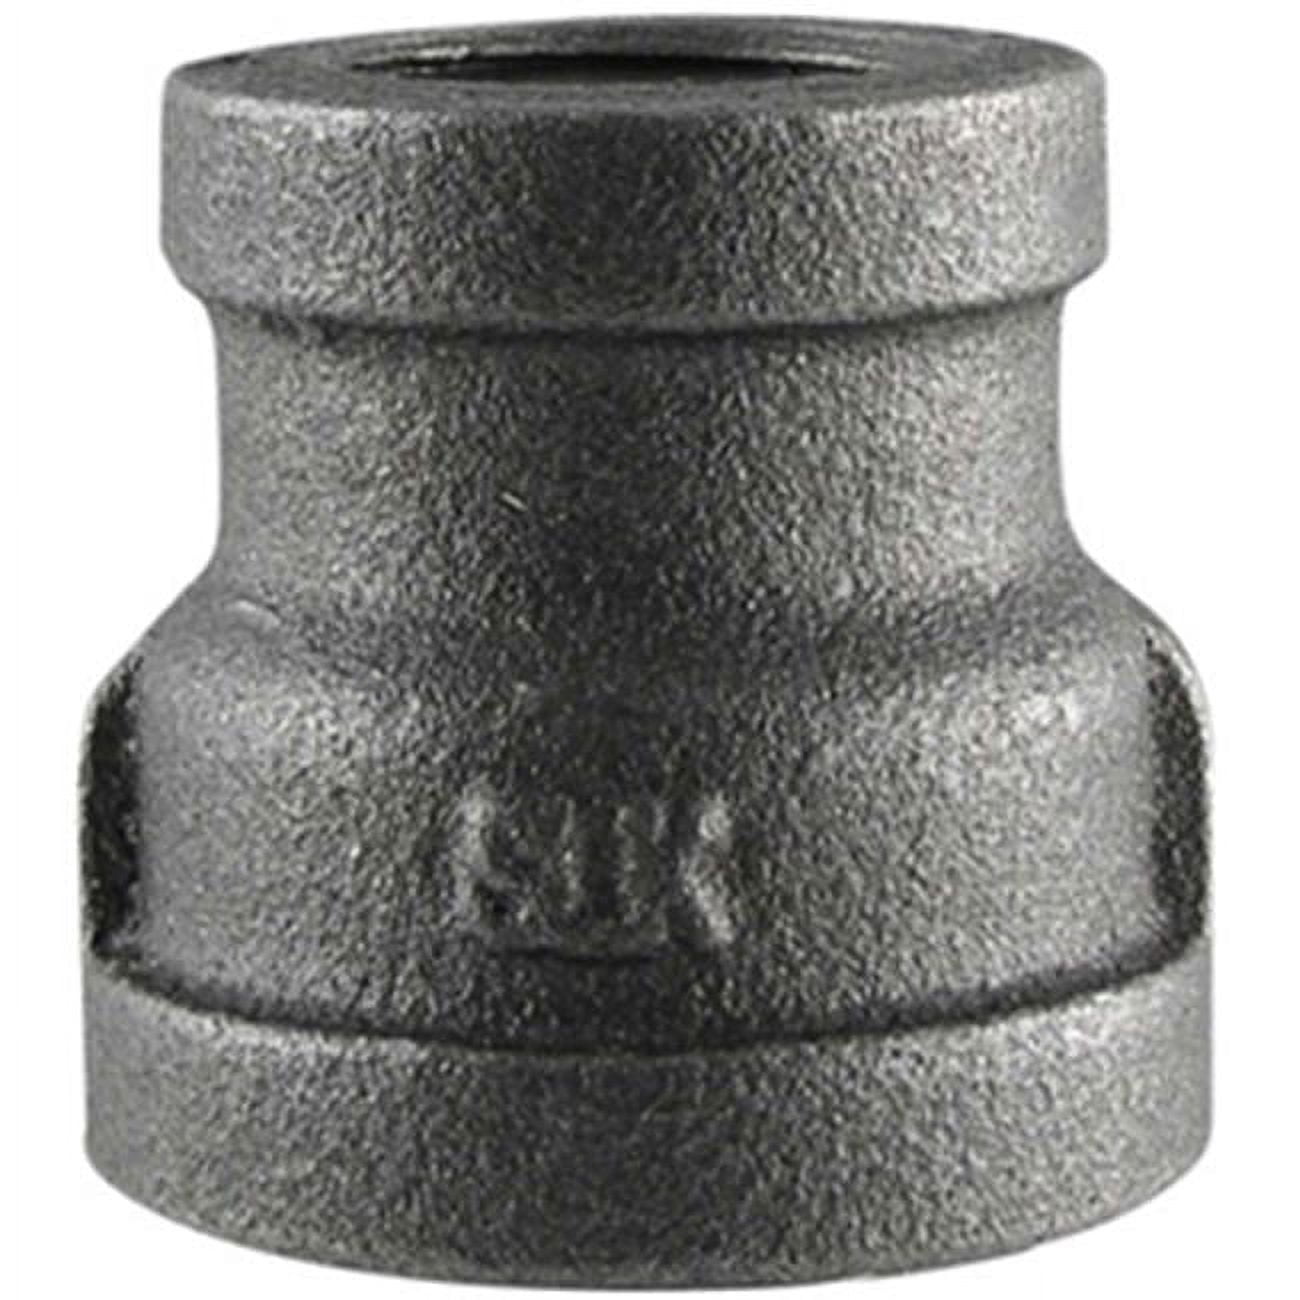 310 Rc-11234 1.5 X 0.75 In. Black Reducer Coupling